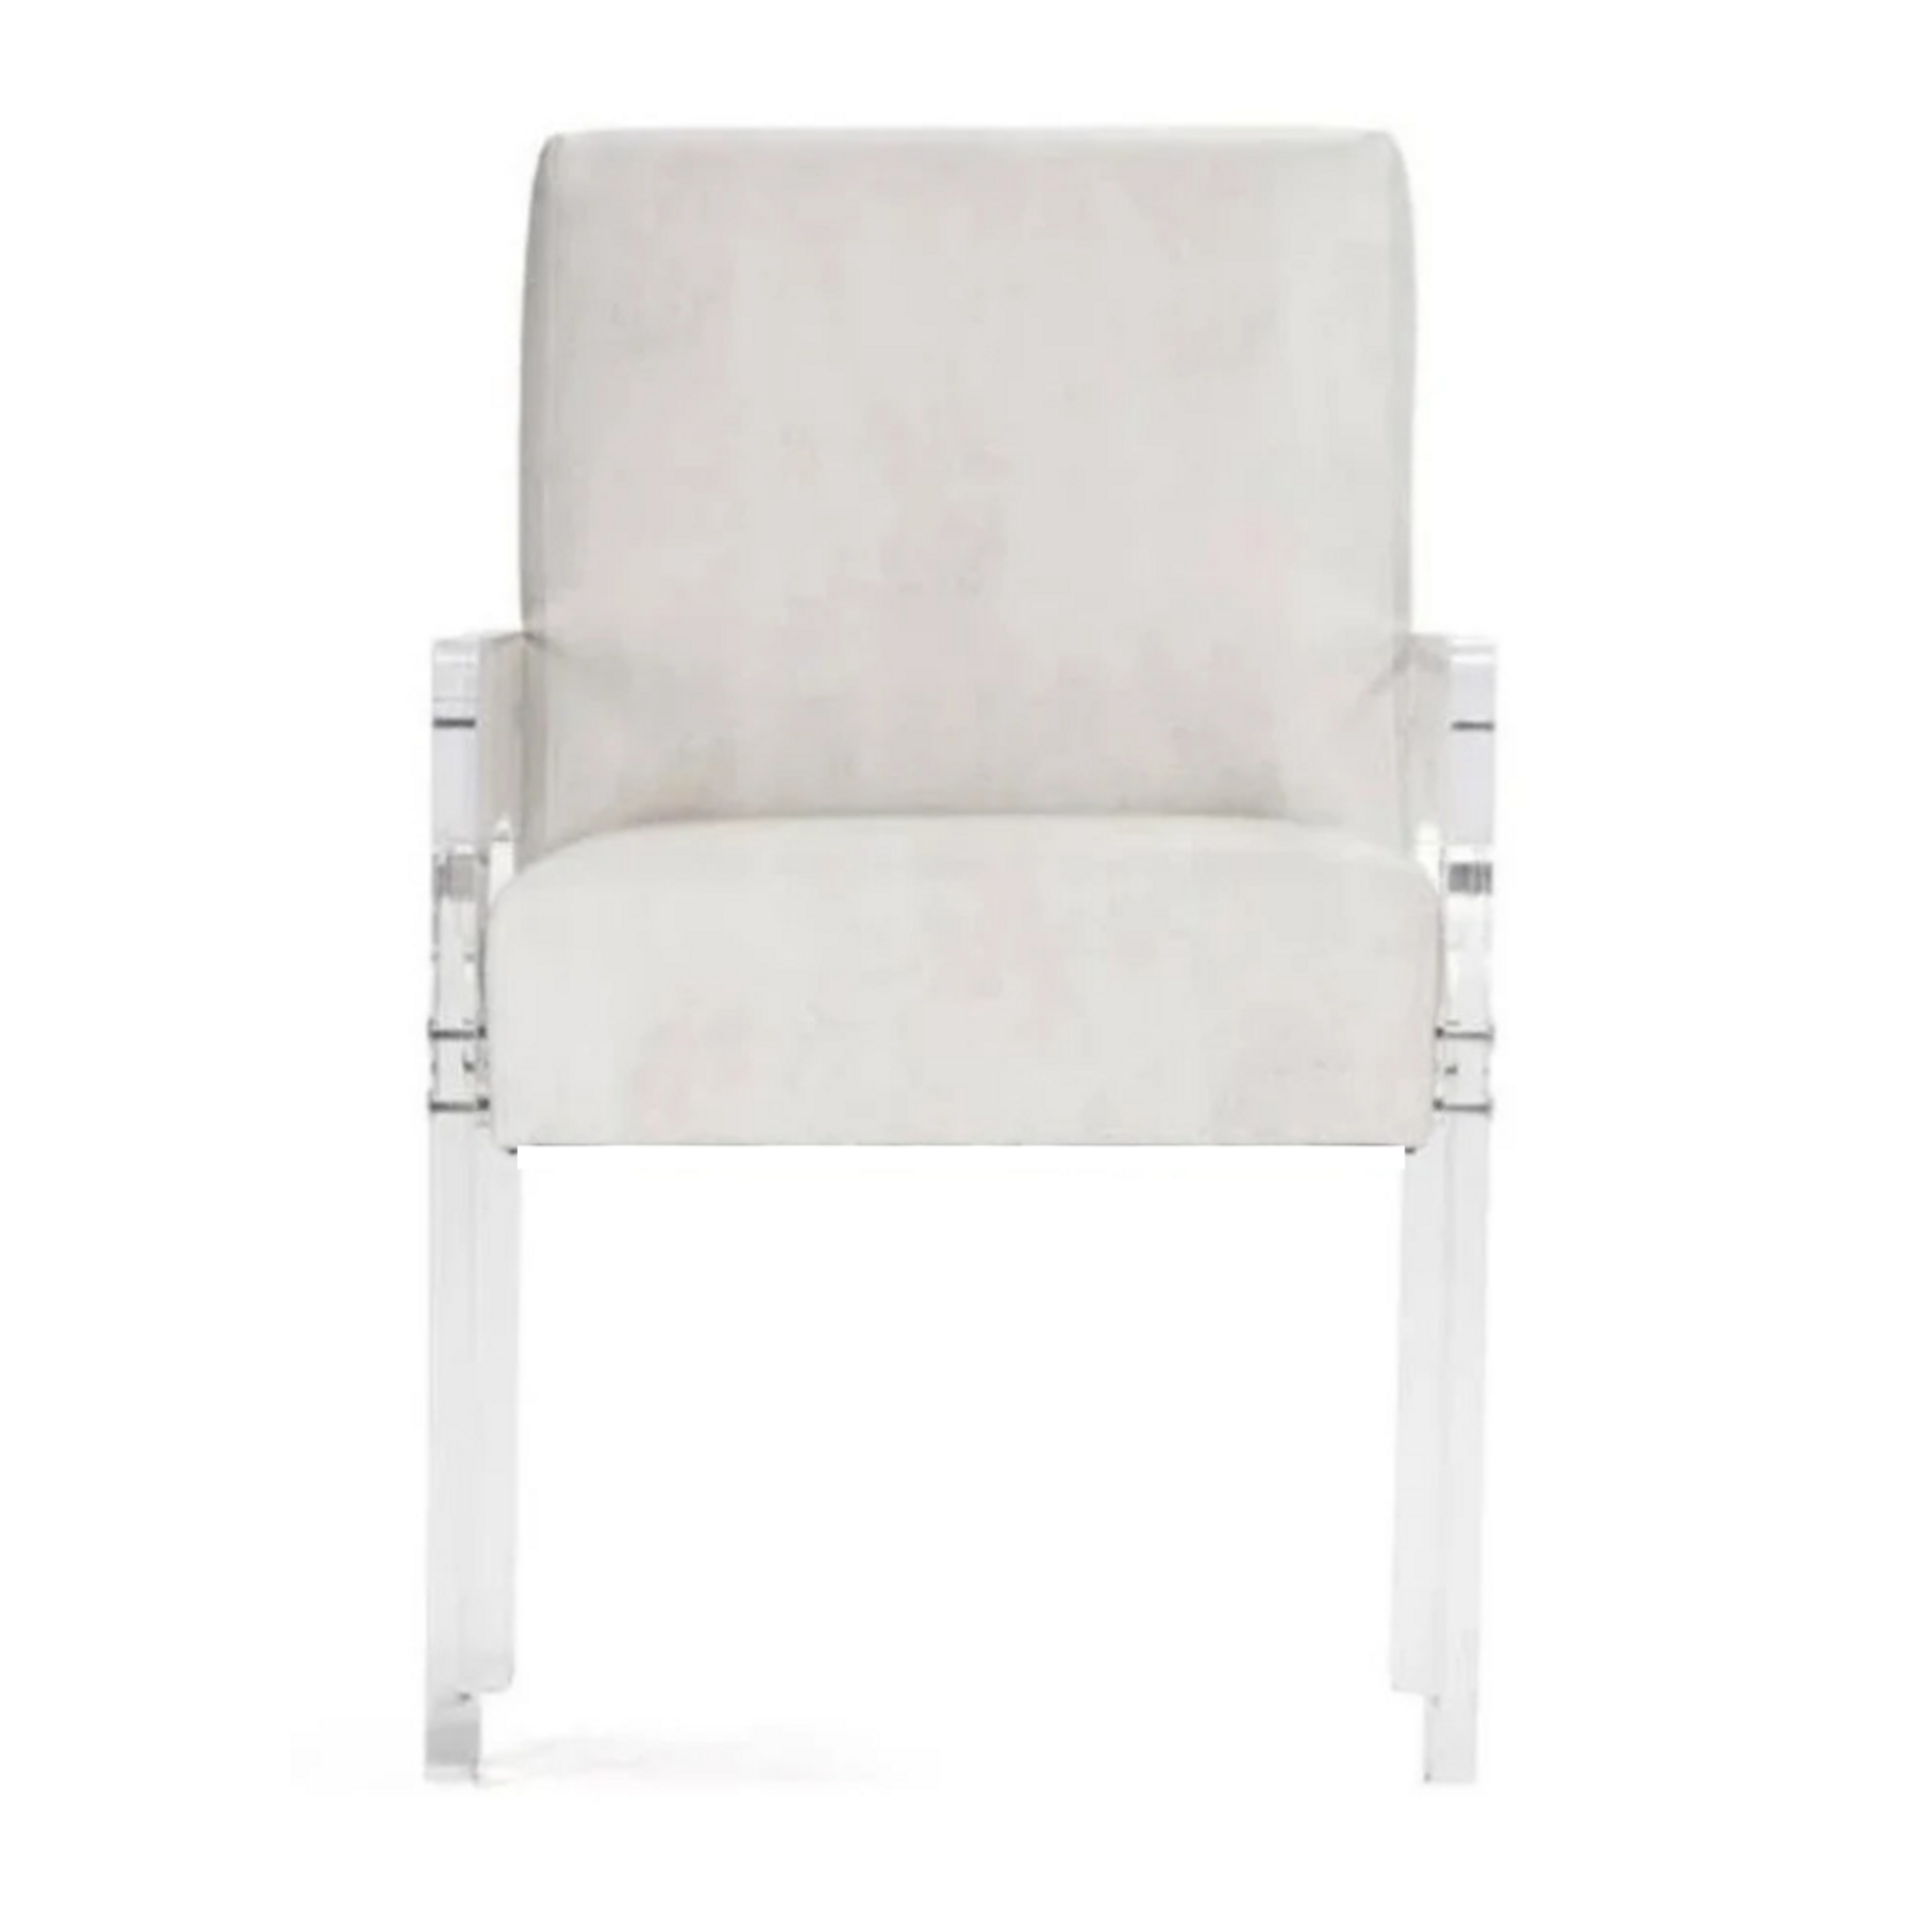 Clear Lucite Arm Chair with Ivory Faux Leather Upholstery